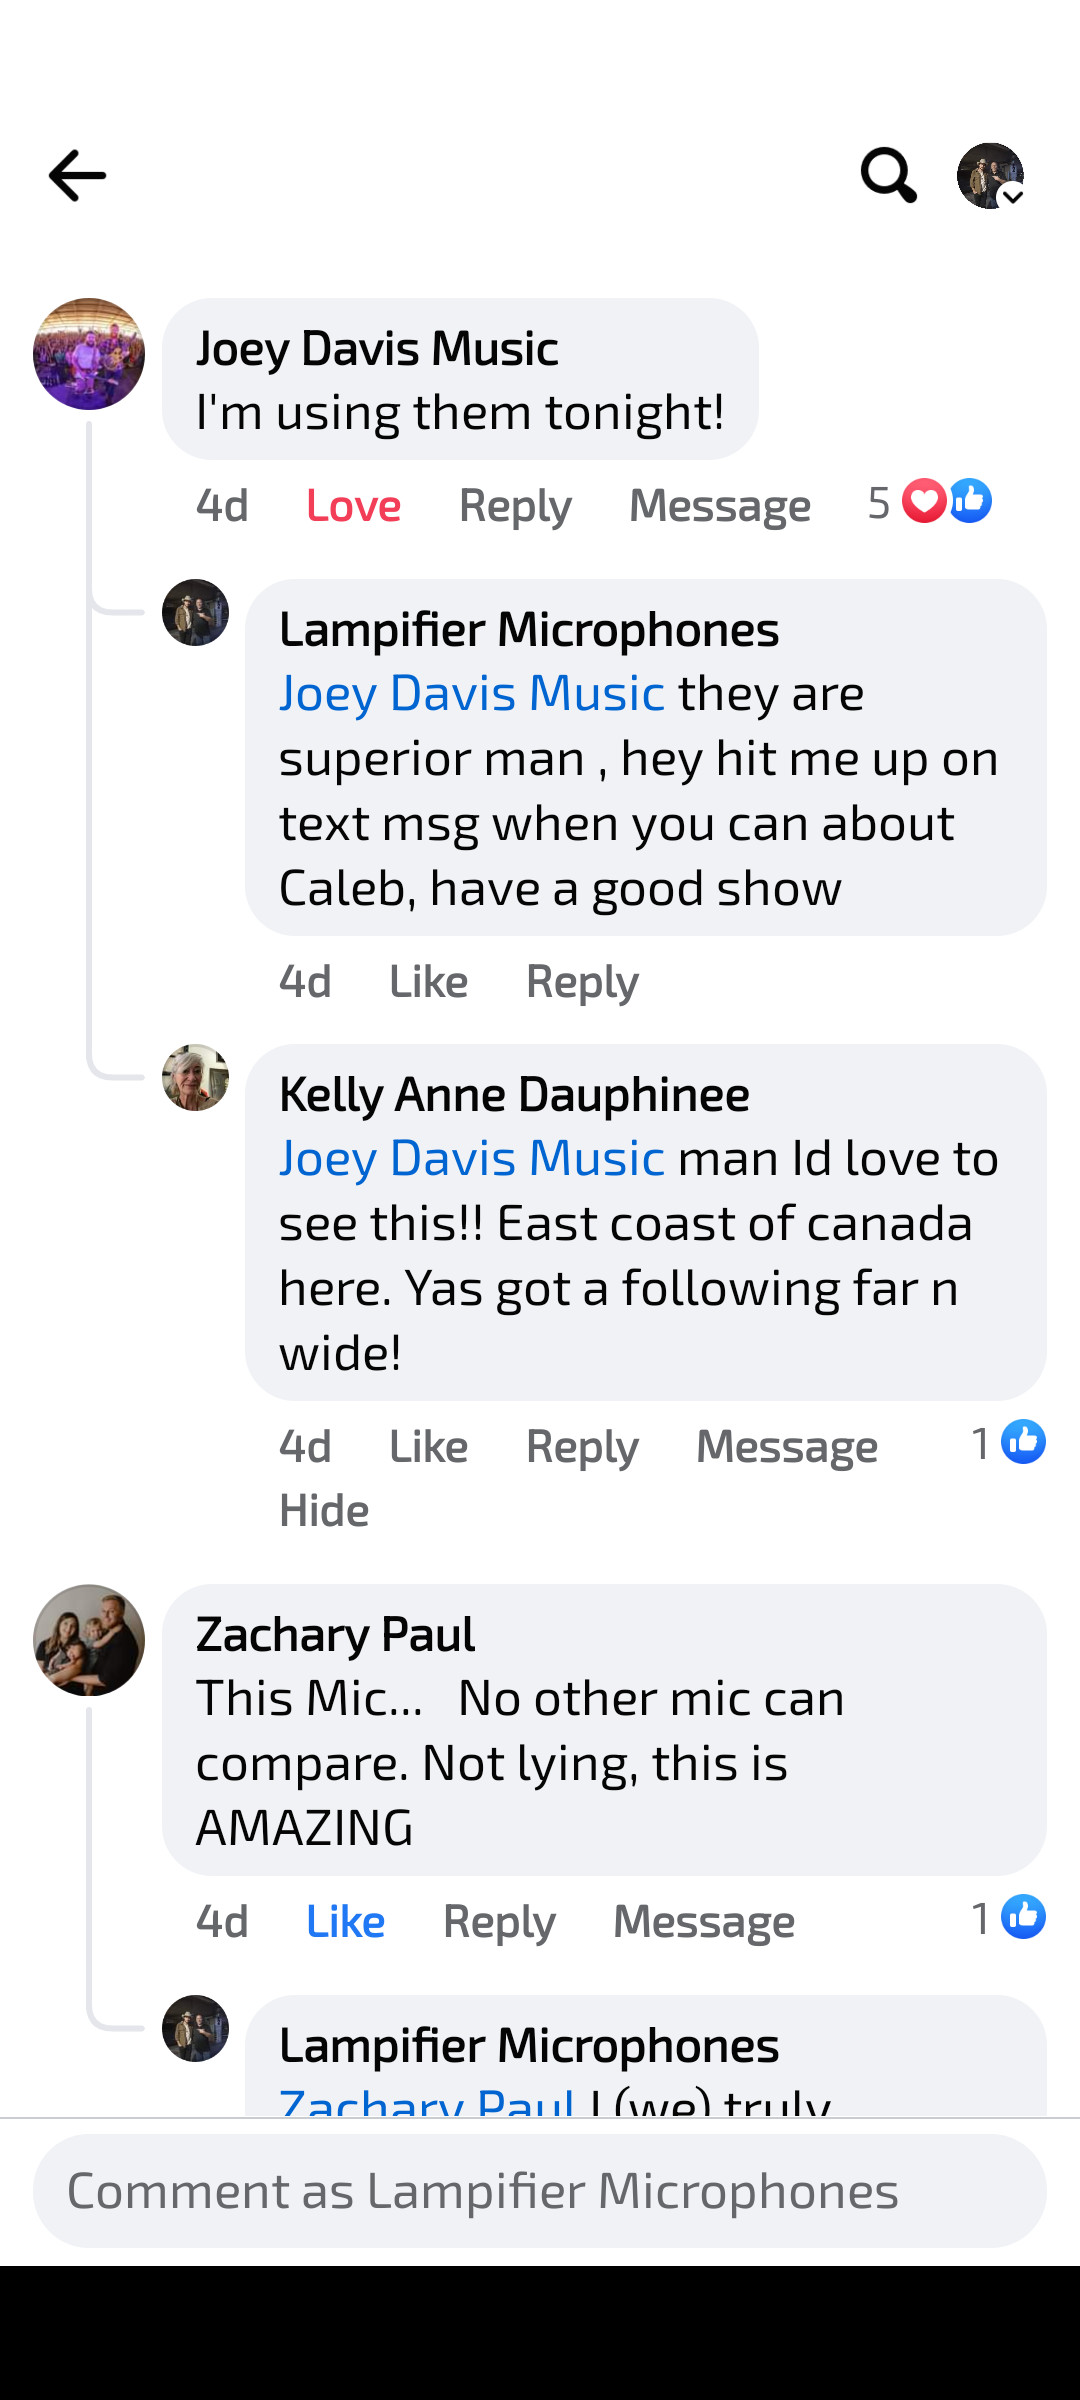 Image of Kelly Anne Dauphinee and Joey Davis Music Facebook messenger complimenting Lampifier Programmable Microphones